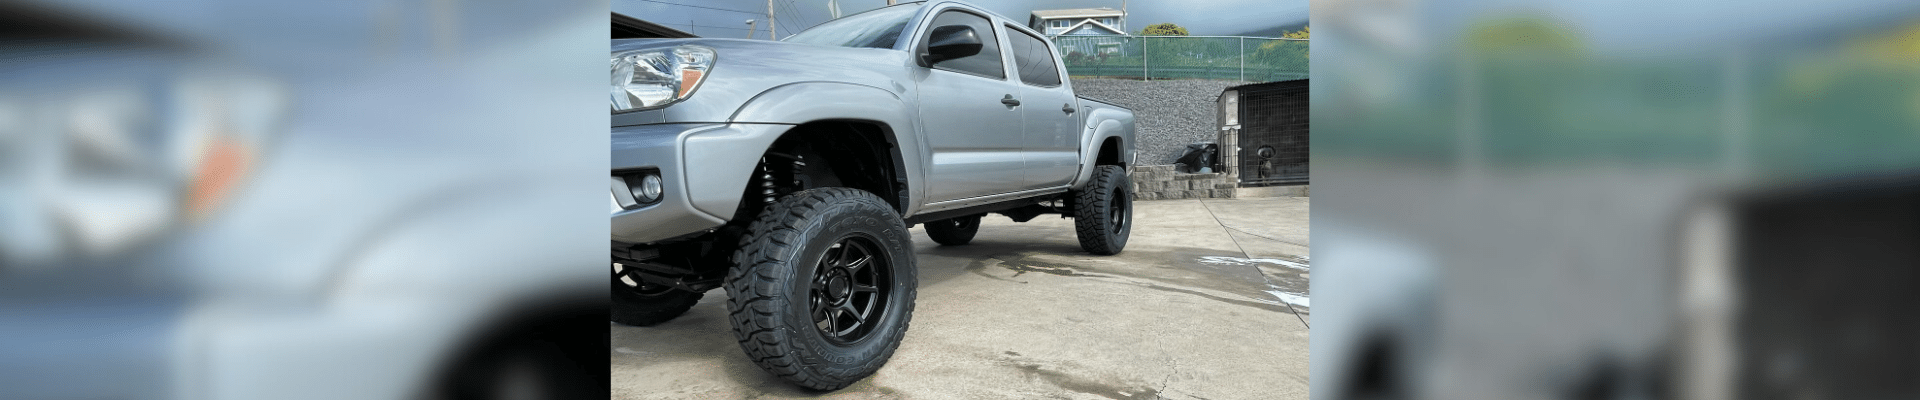 toyota-Tacoma-Gallery-Pic.png